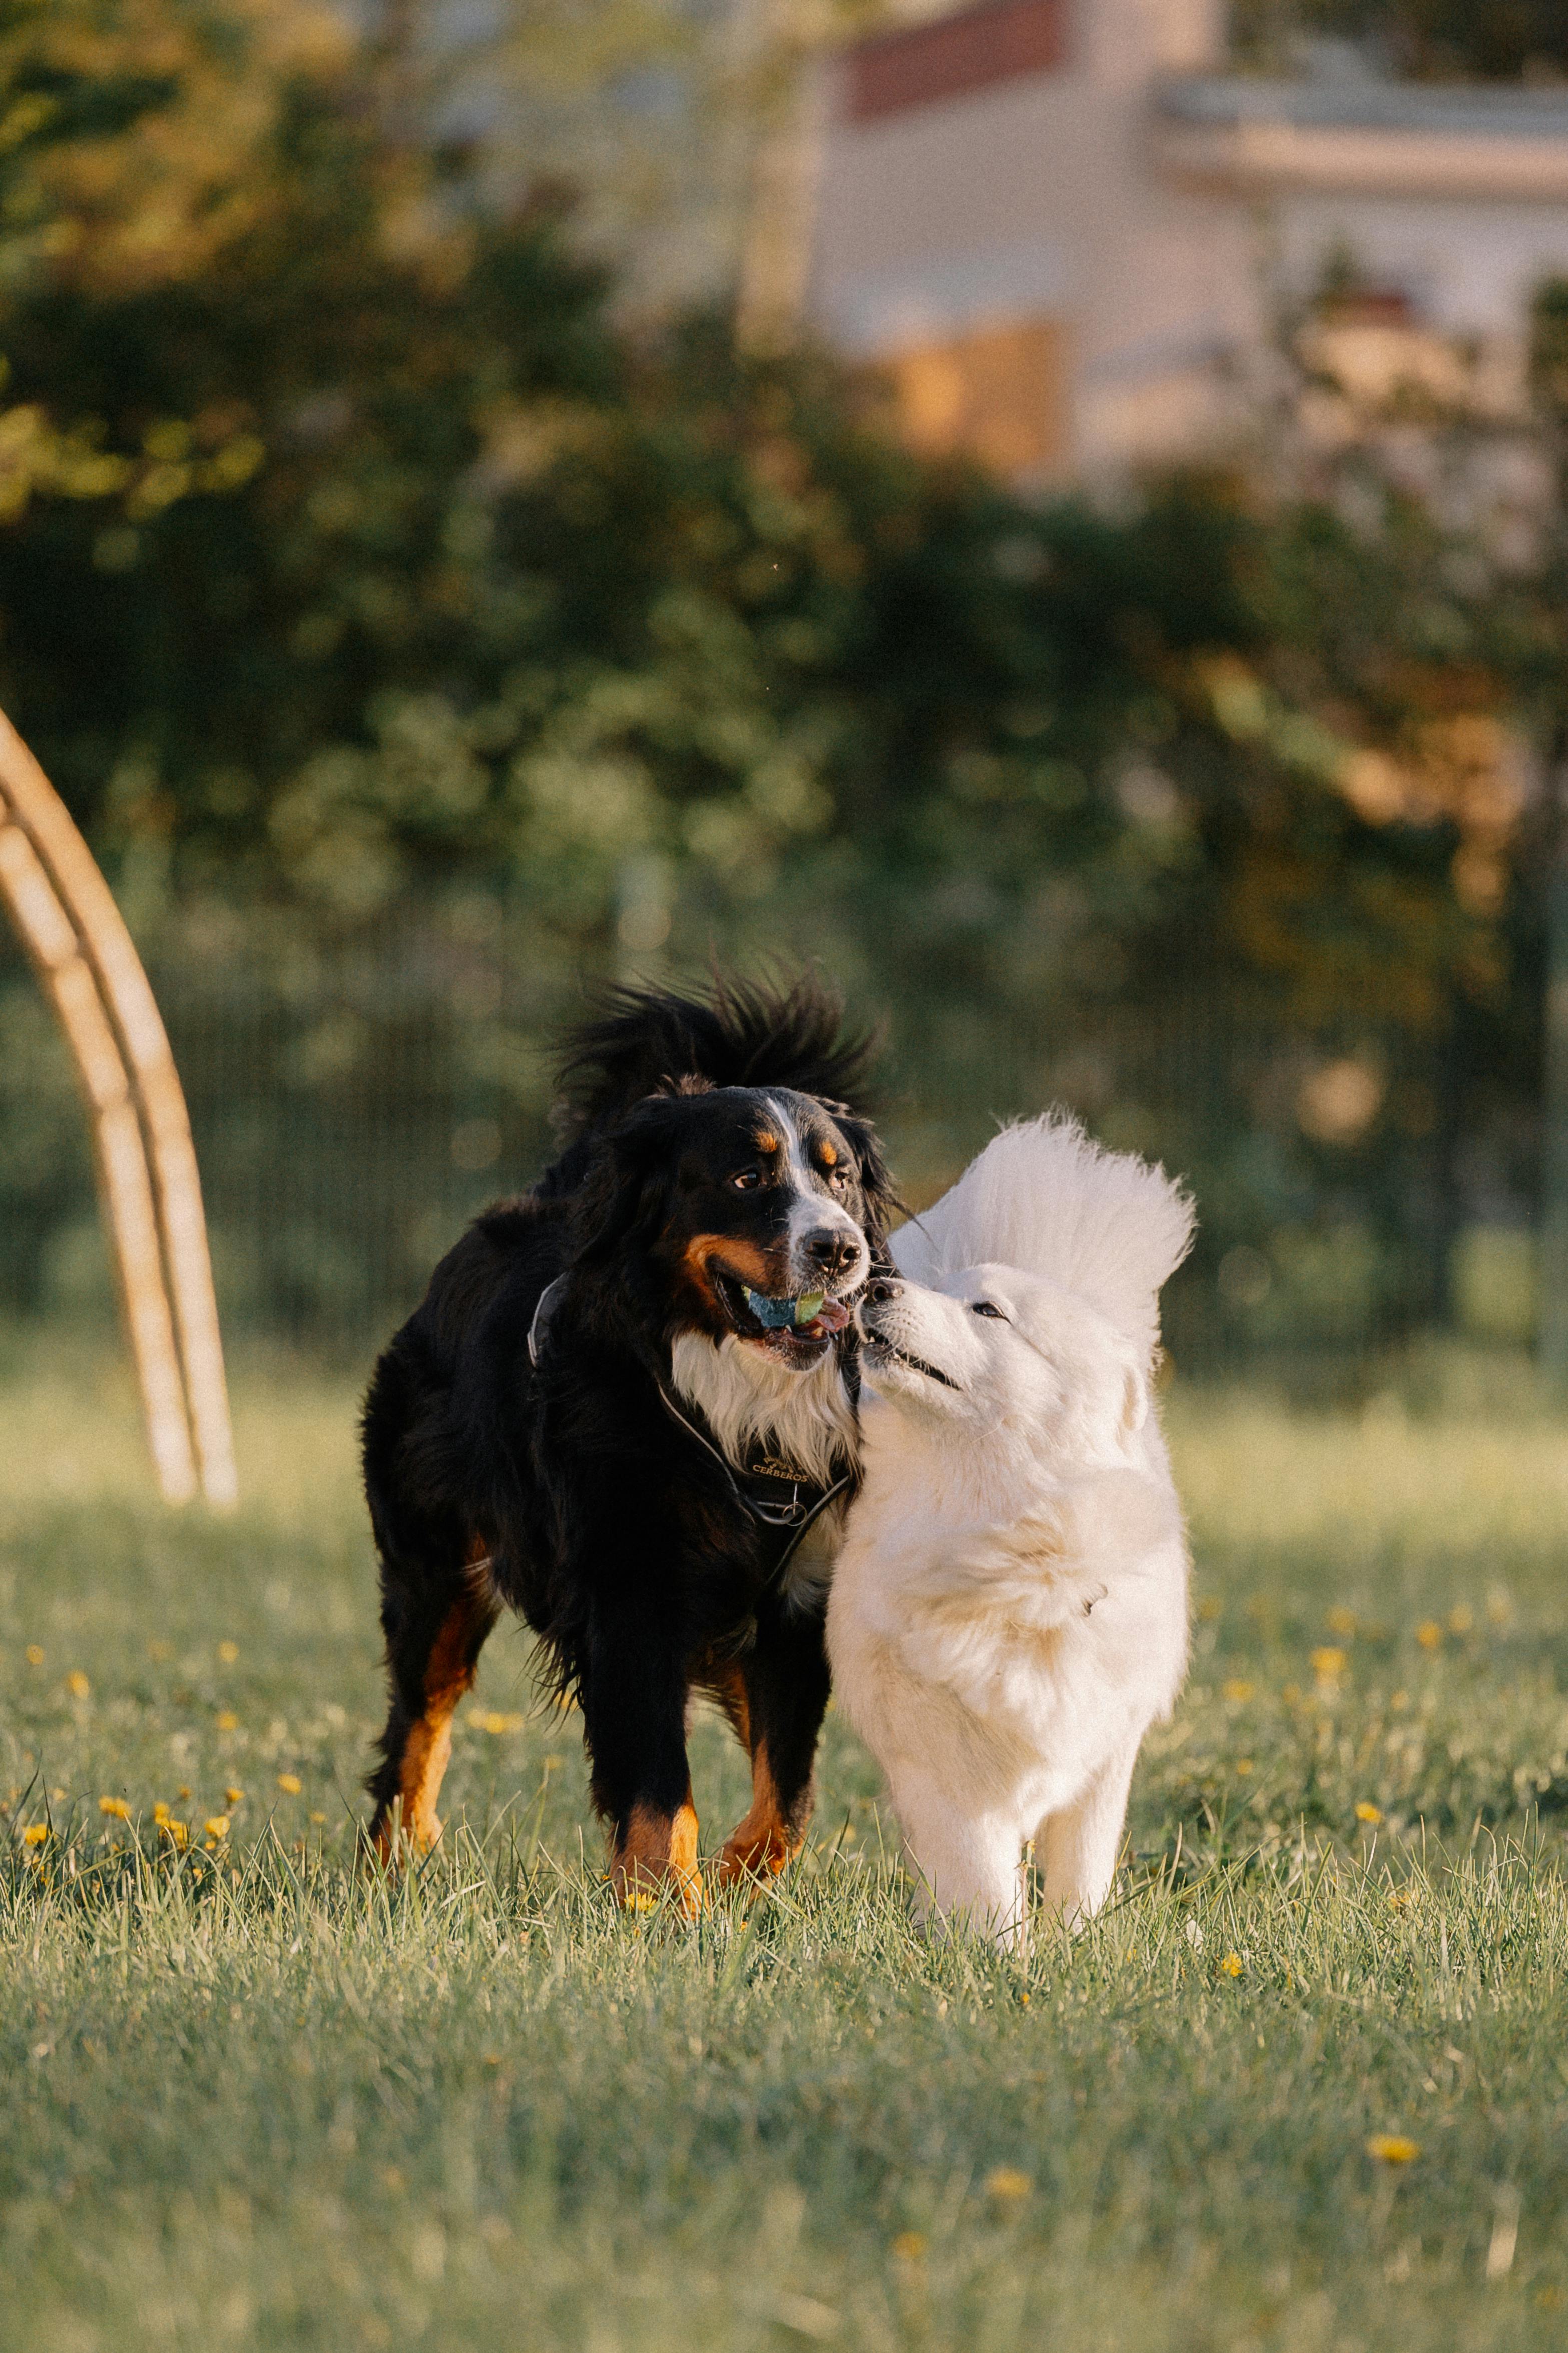 Two dogs | Source: Pexels